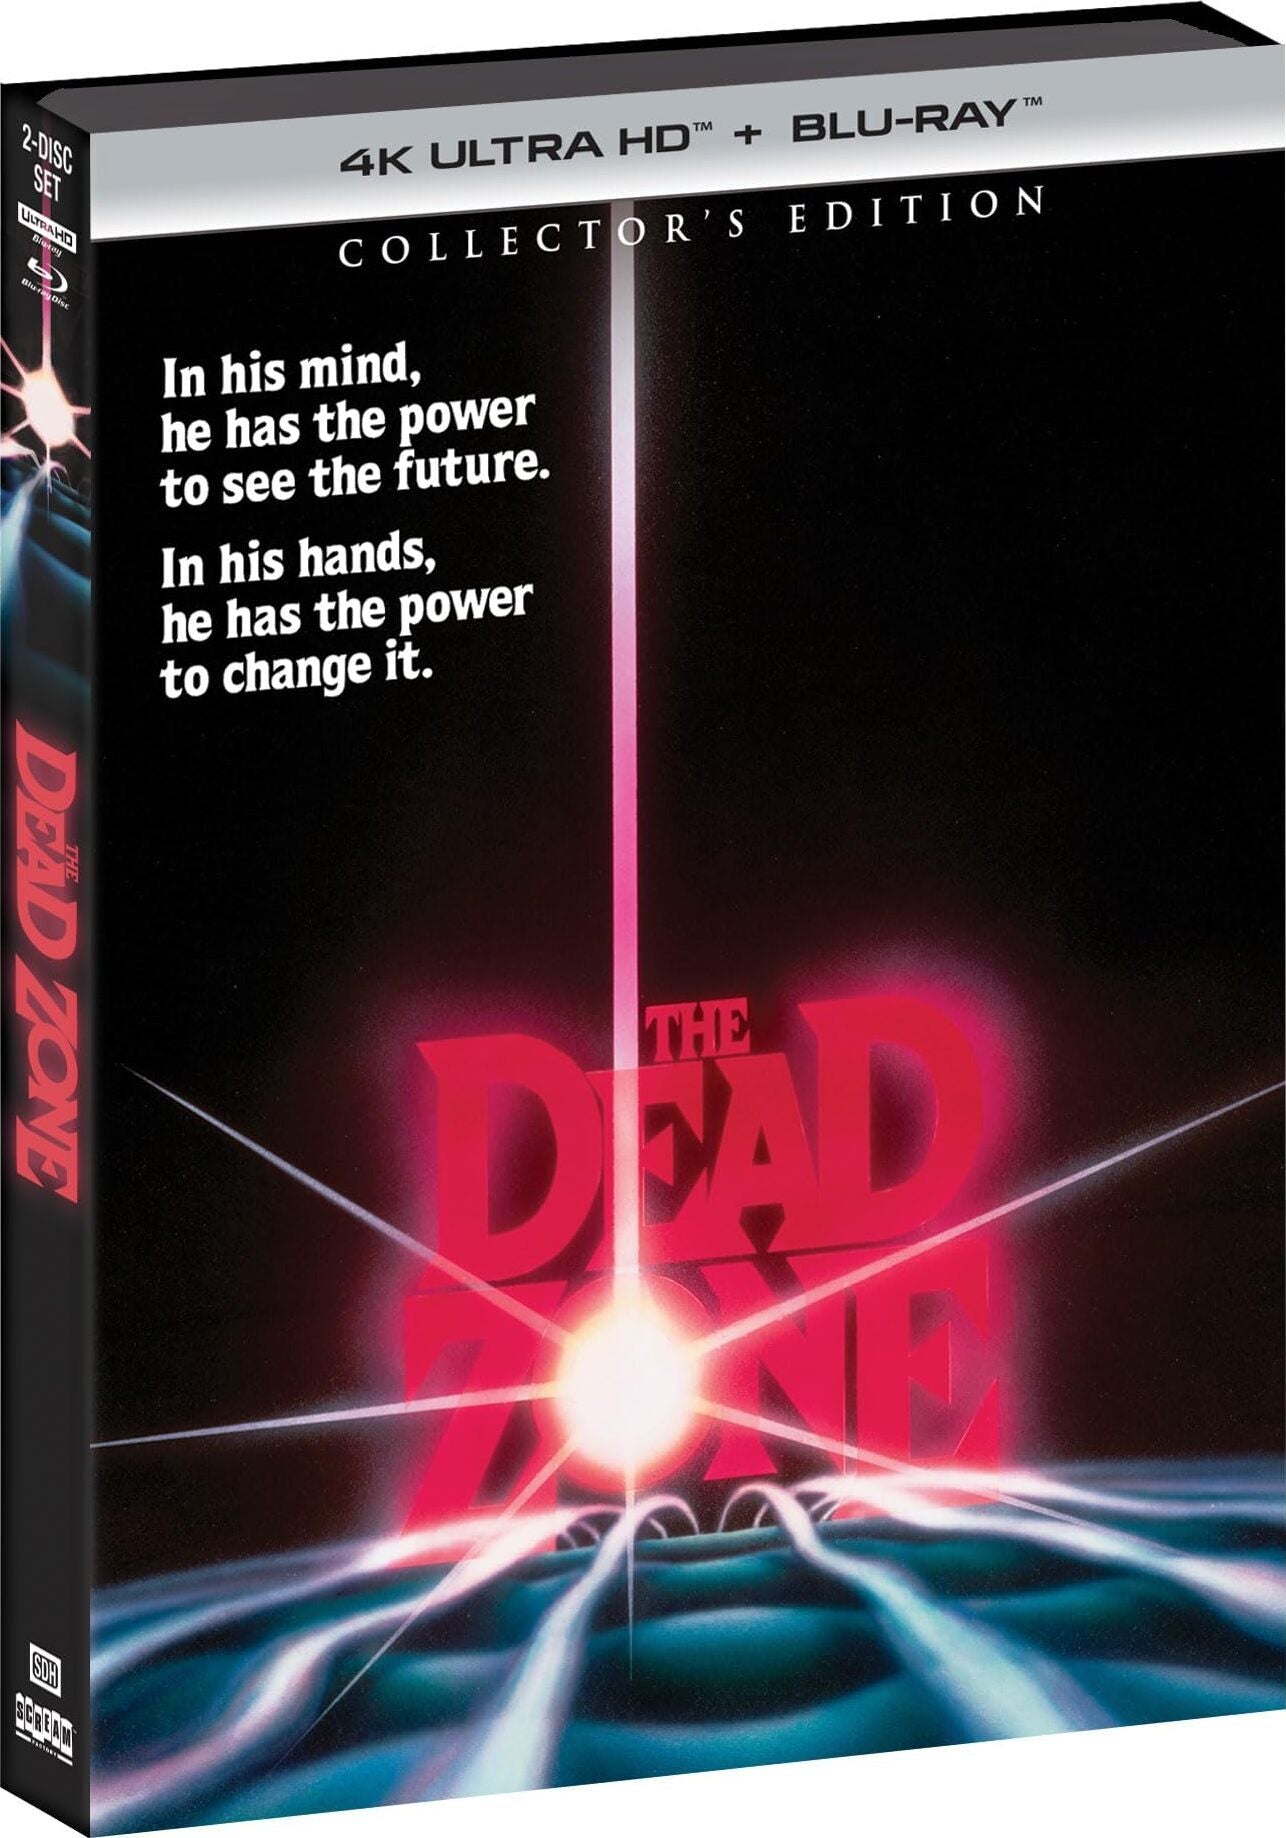 The Dead Zone 4K: Collector's Edition (1983)